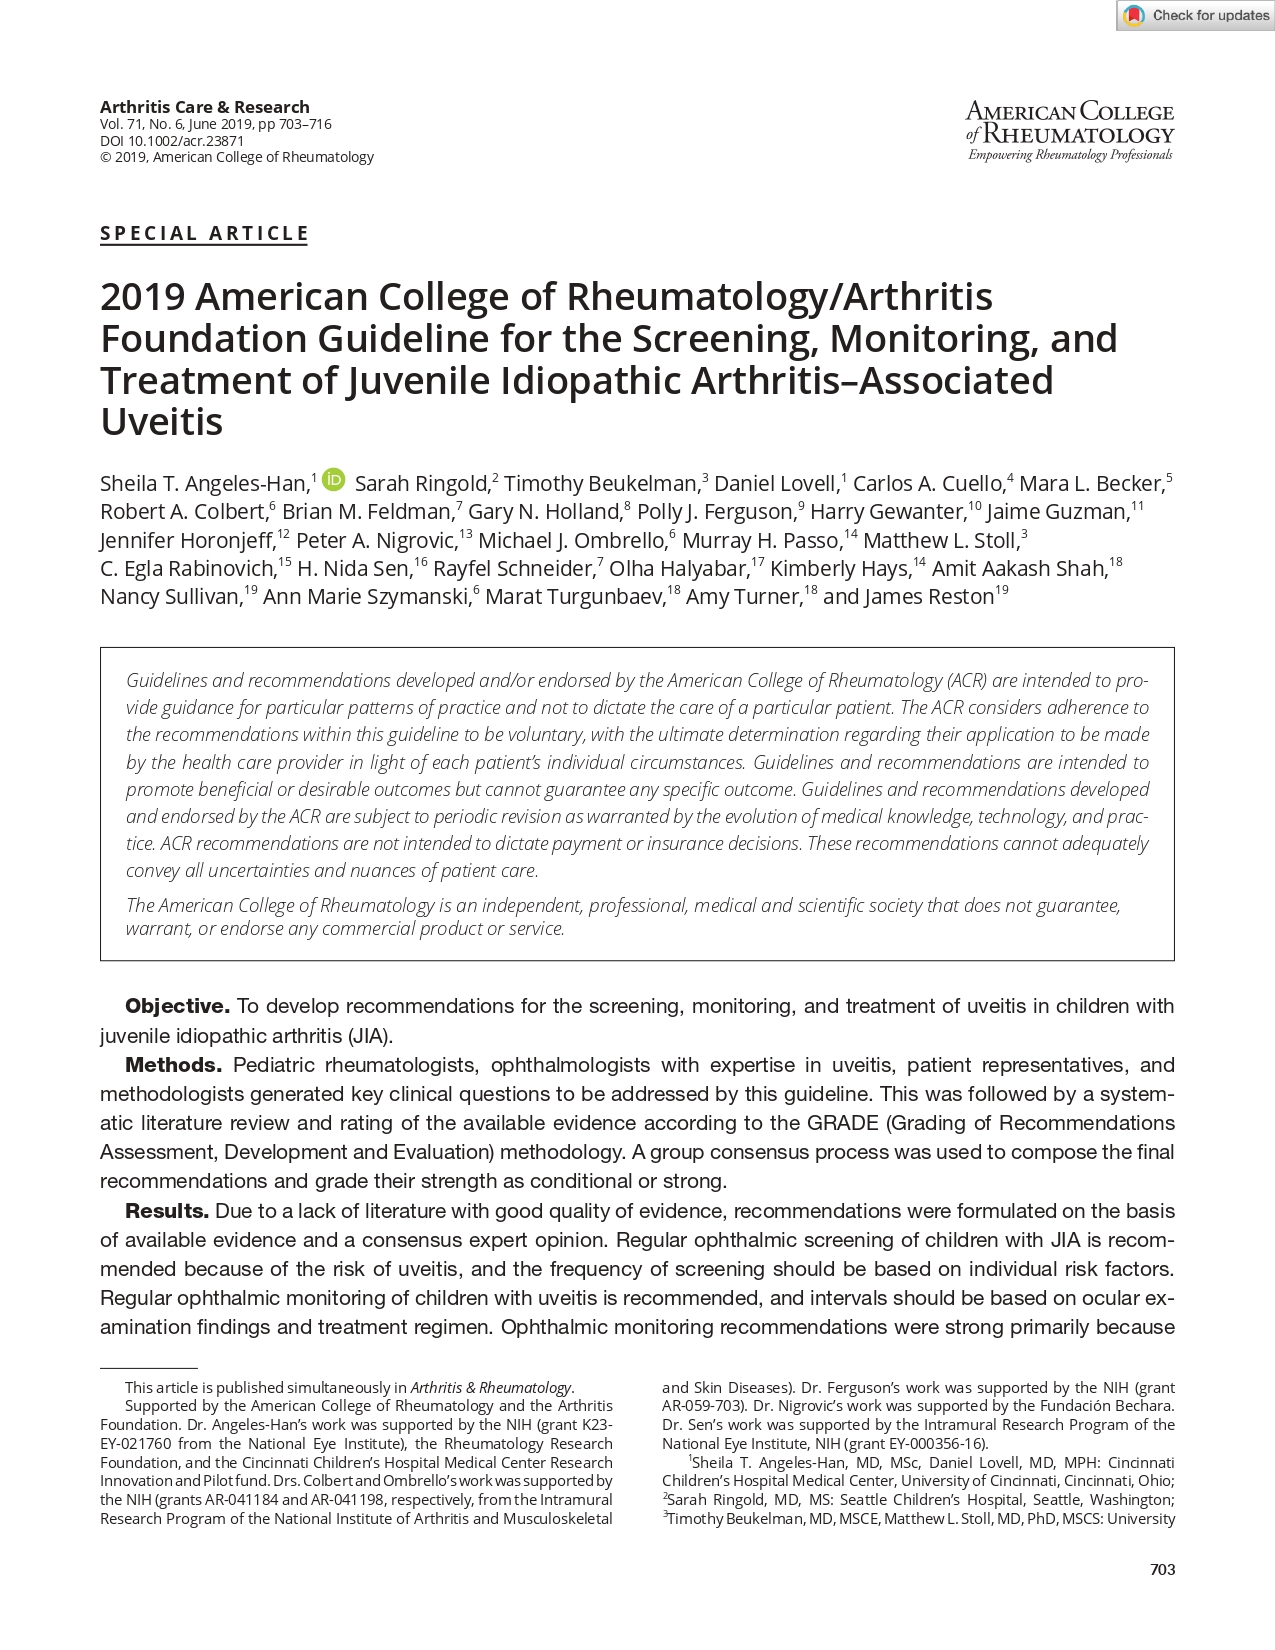 2019 American College of Rheumatology/Arthritis Foundation Guideline for the Screening, Monitoring, and Treatment of Juvenile Idiopathic Arthritis–Associated Uveitis (ACR 2019)